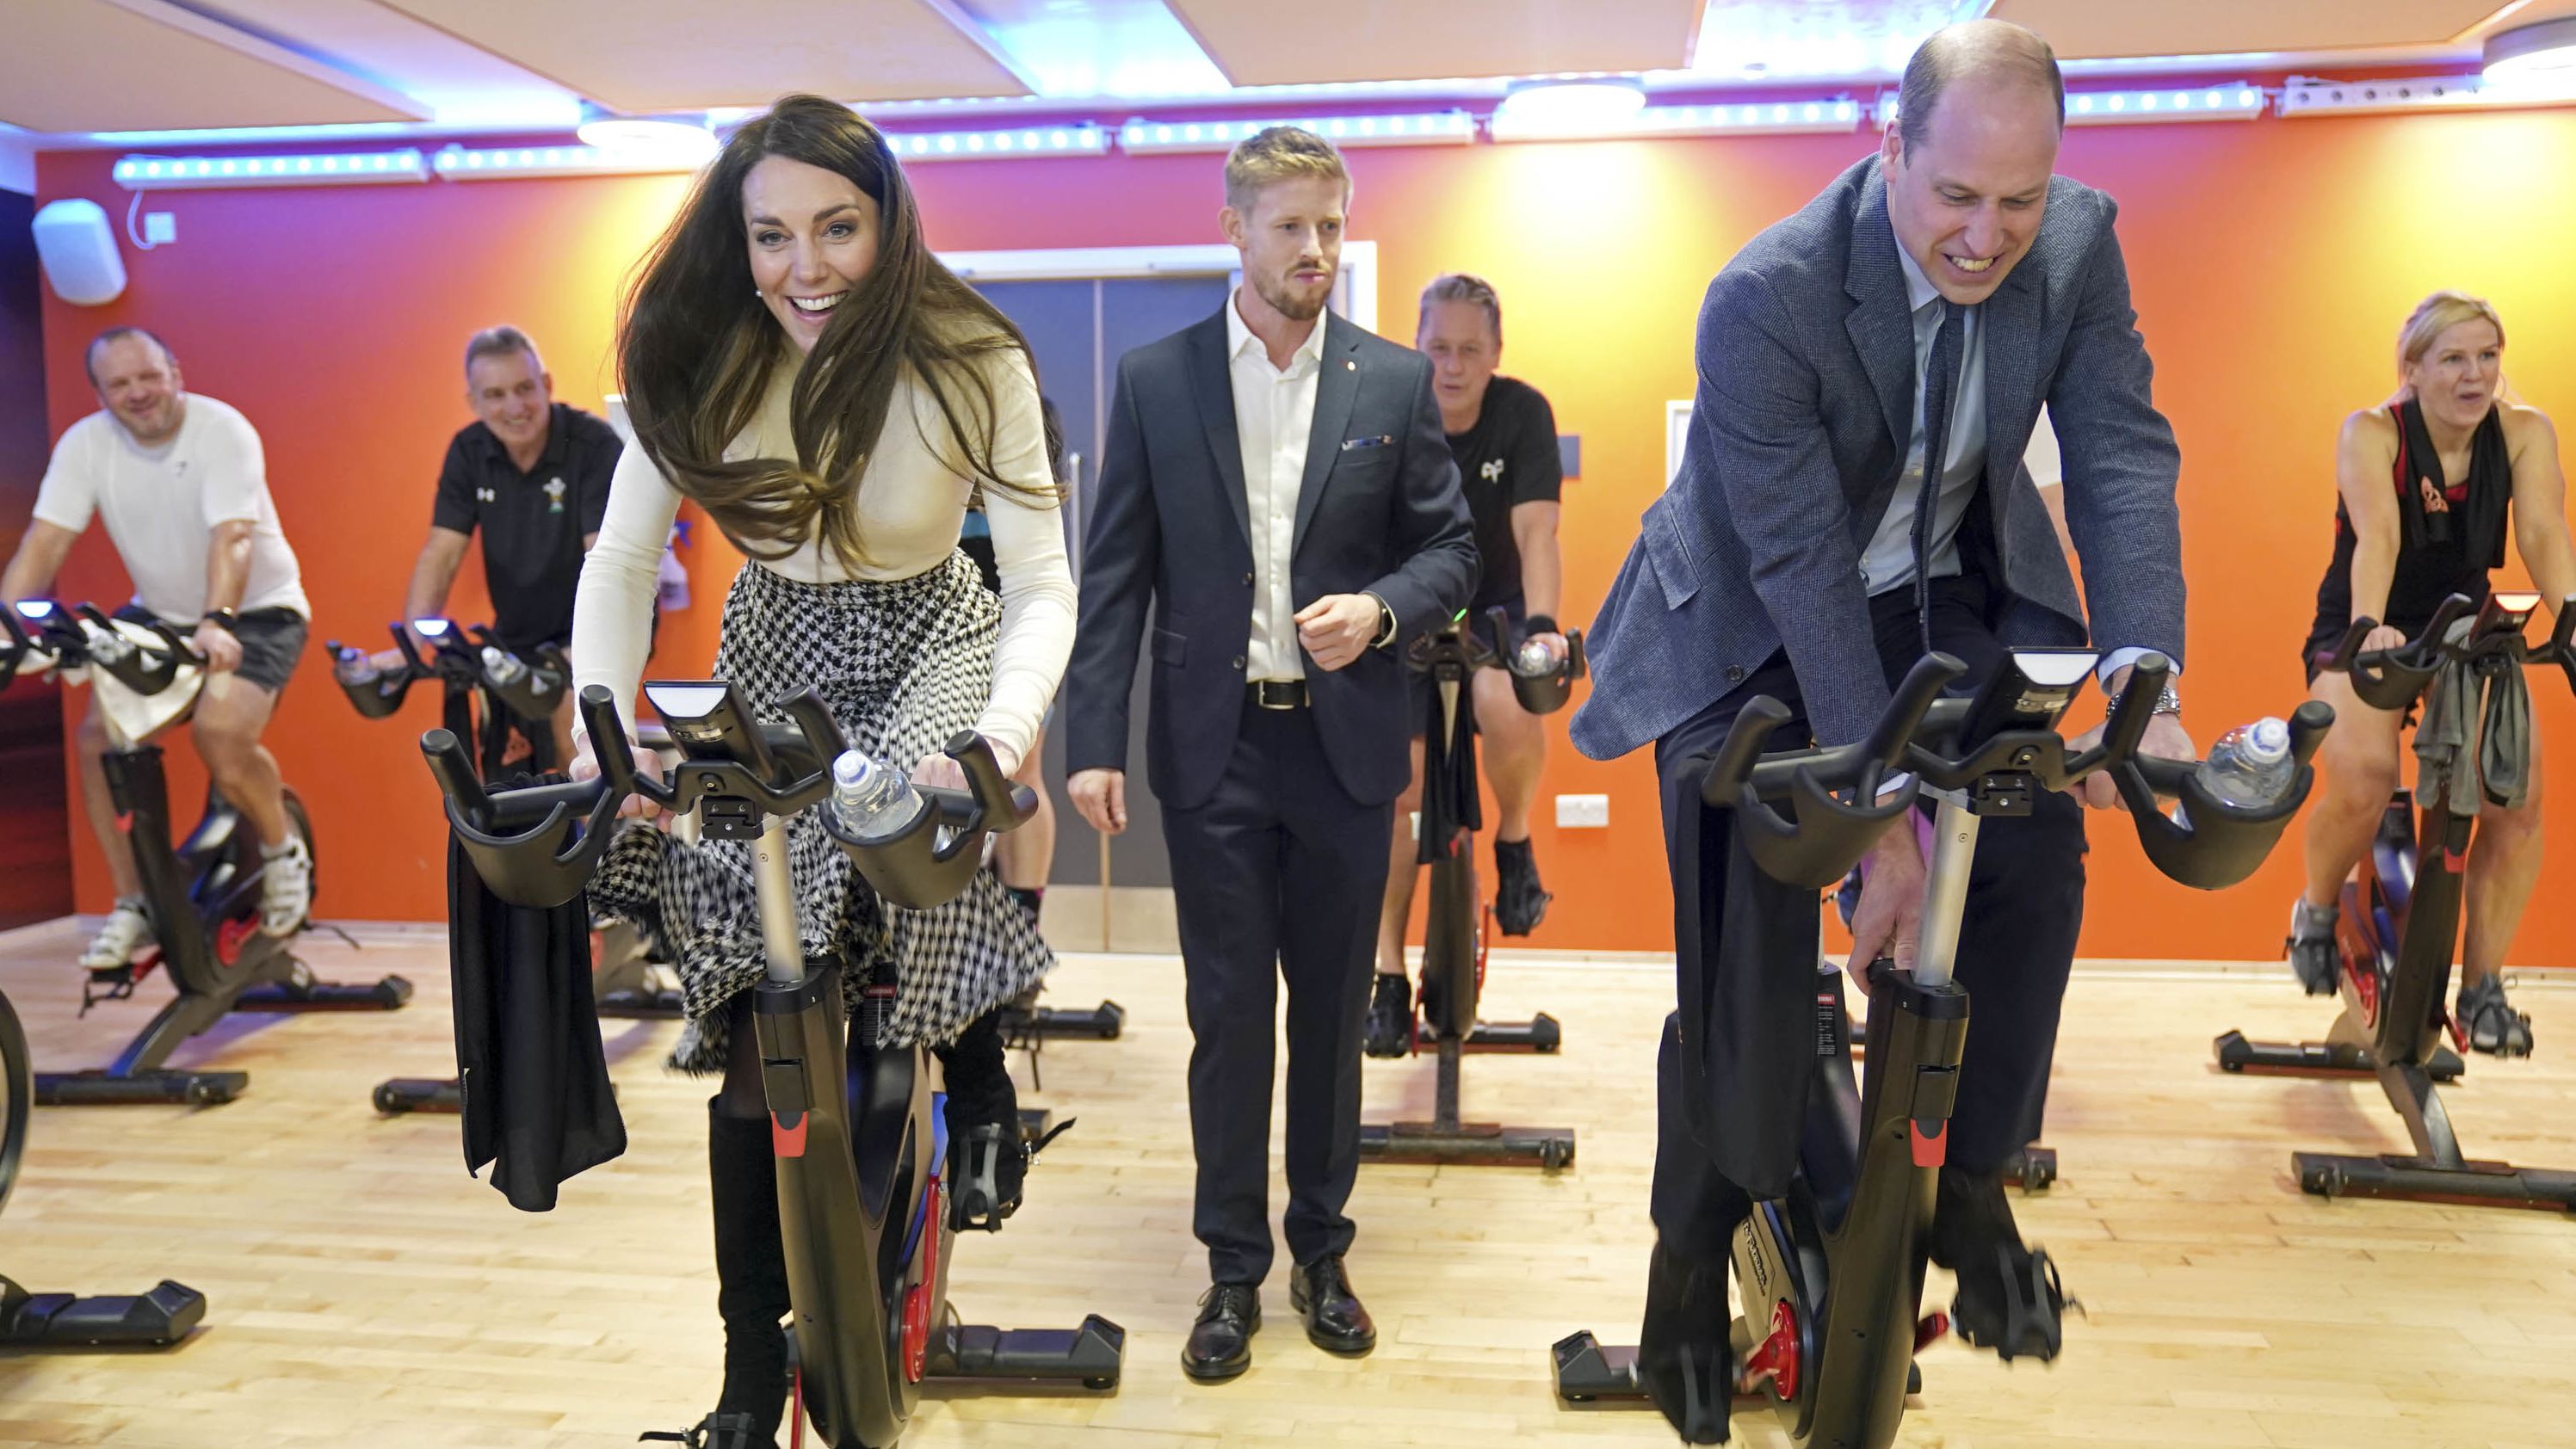 William and Catherine take part in a spin class during while visiting a fitness center in Port Talbot, Wales, in February 2023.